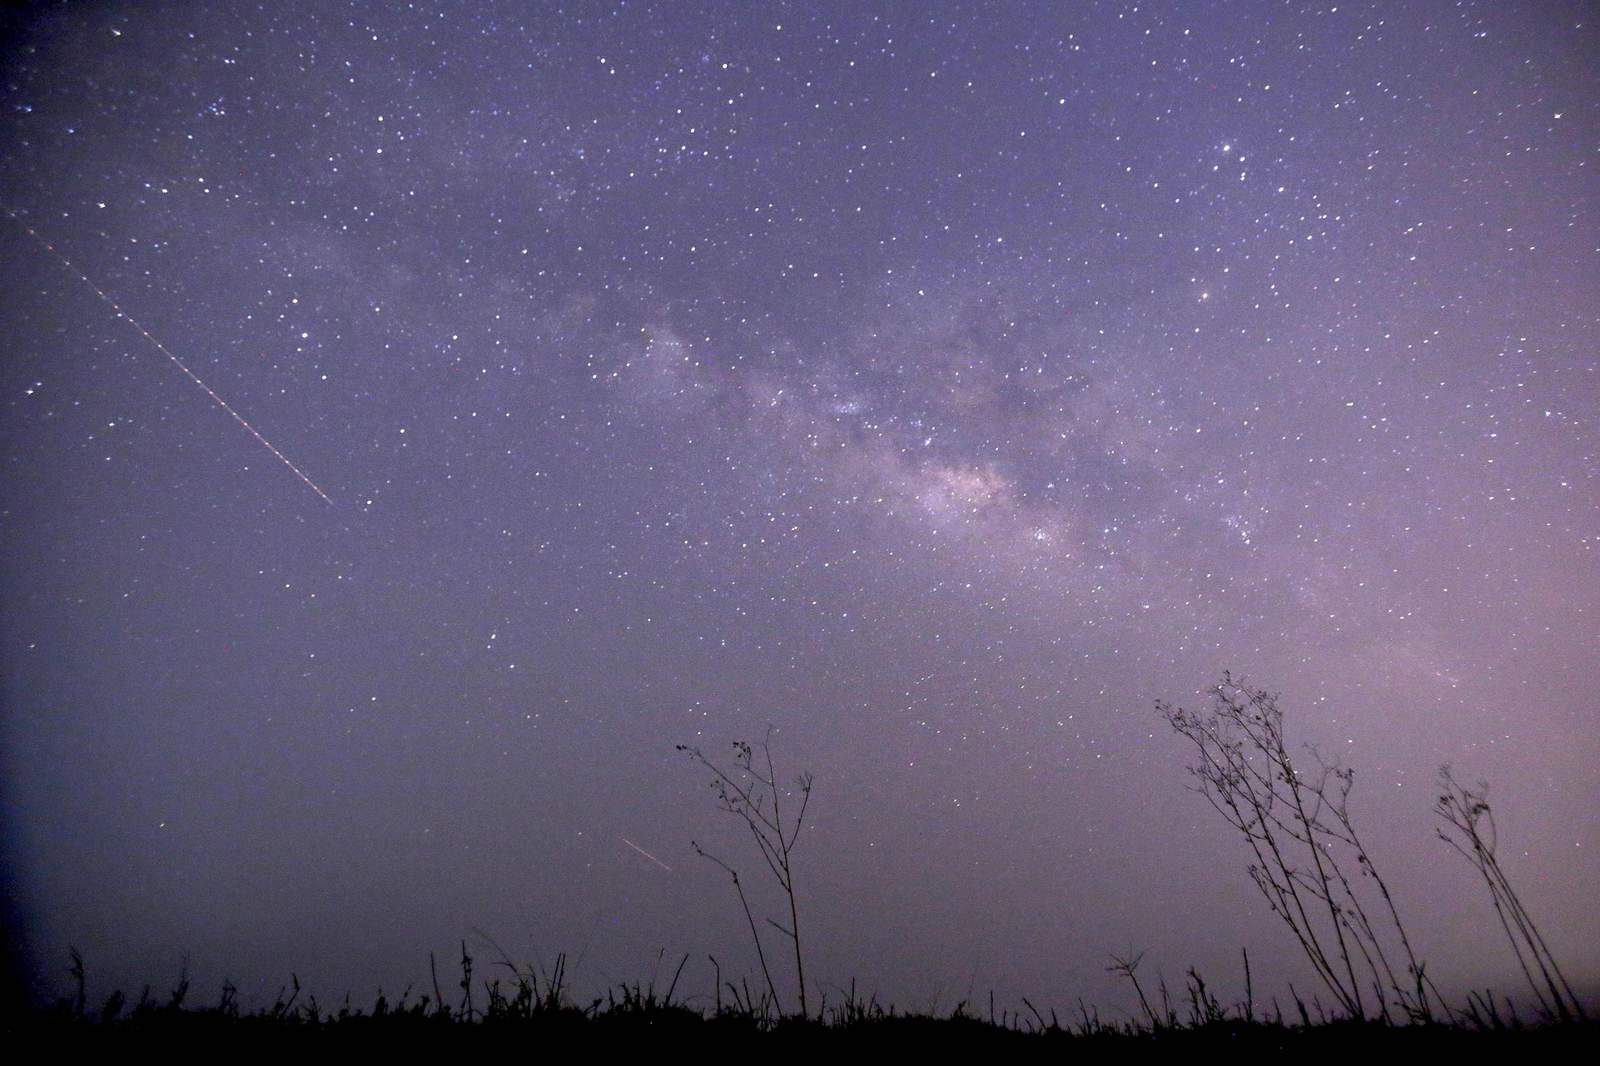 Watch for the Lyrid meteor shower this week